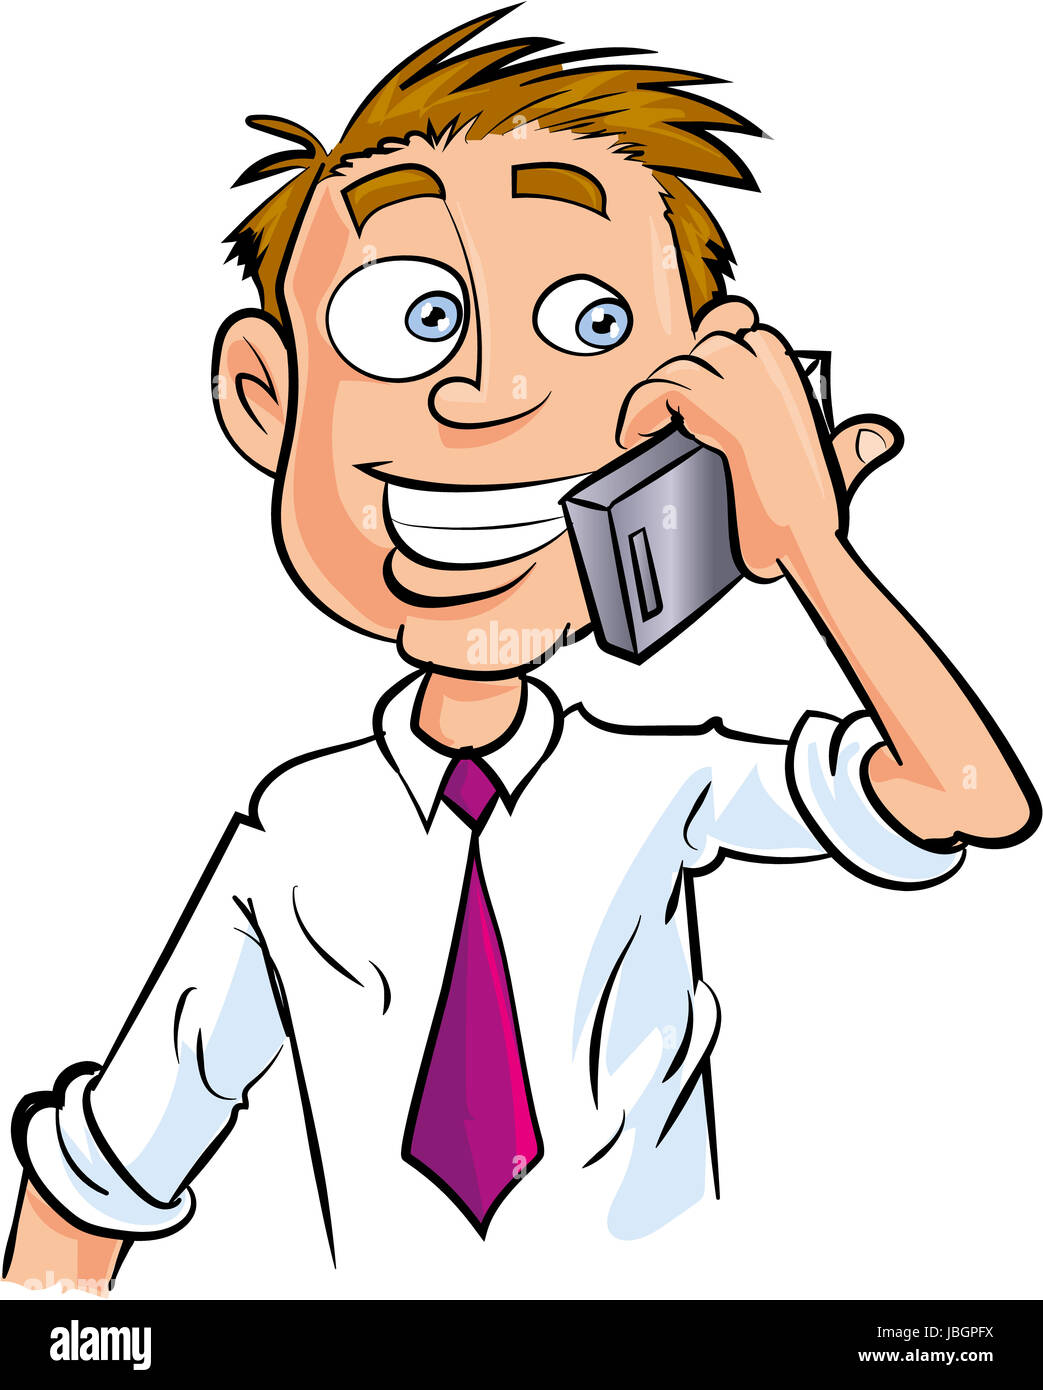 Cartoon office worker making phone call. Isolated Stock Photo